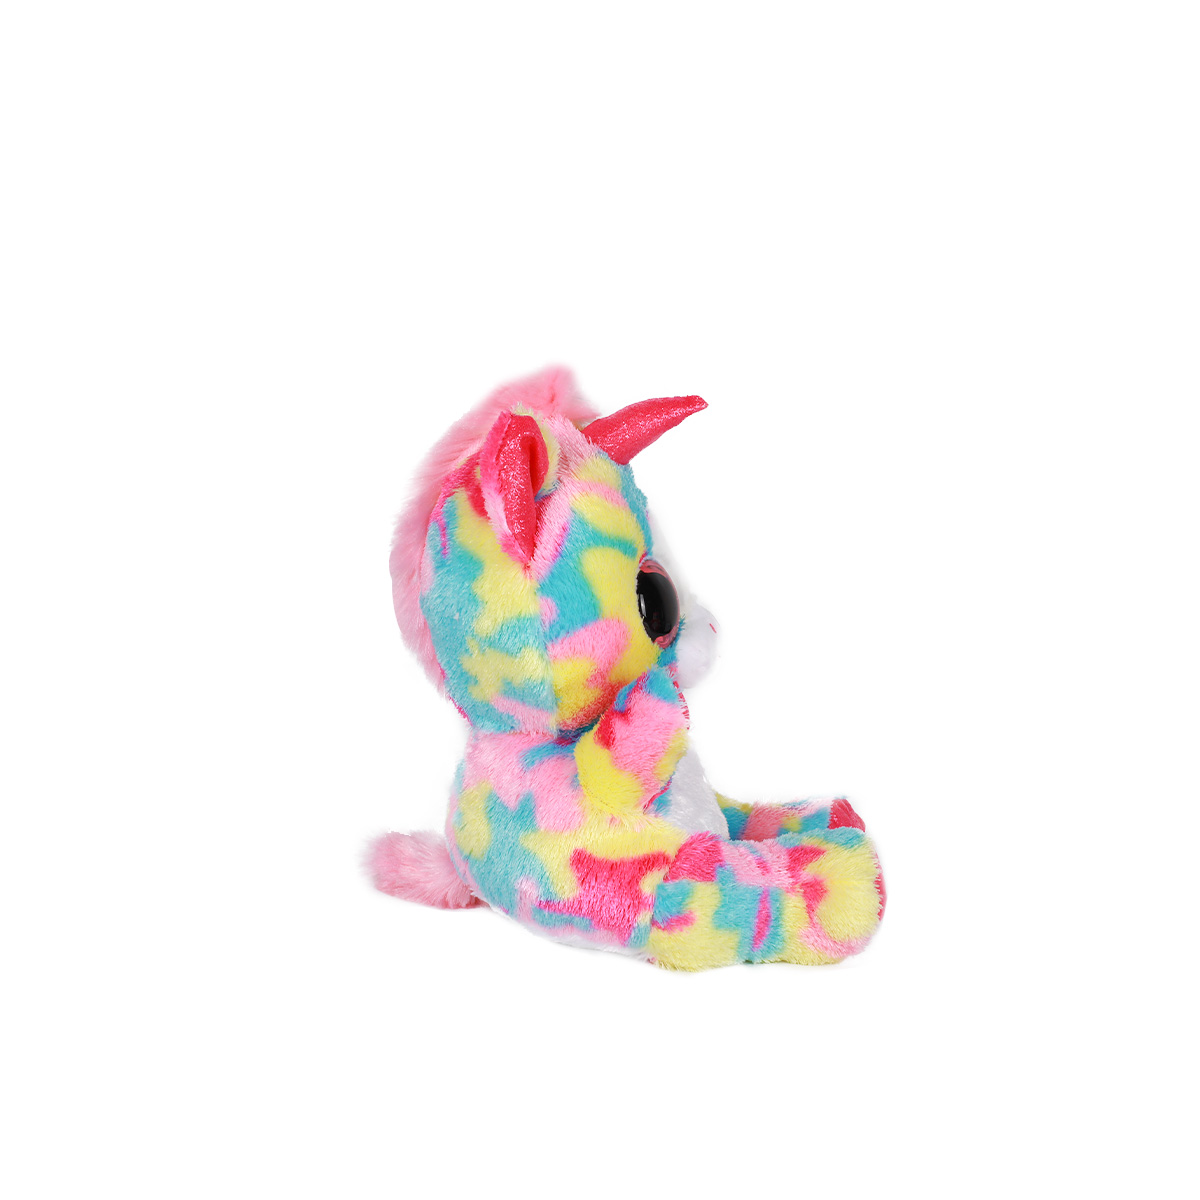 Animotsu Unicorn by Keel Toys in 4 colours 25cm SF0845 